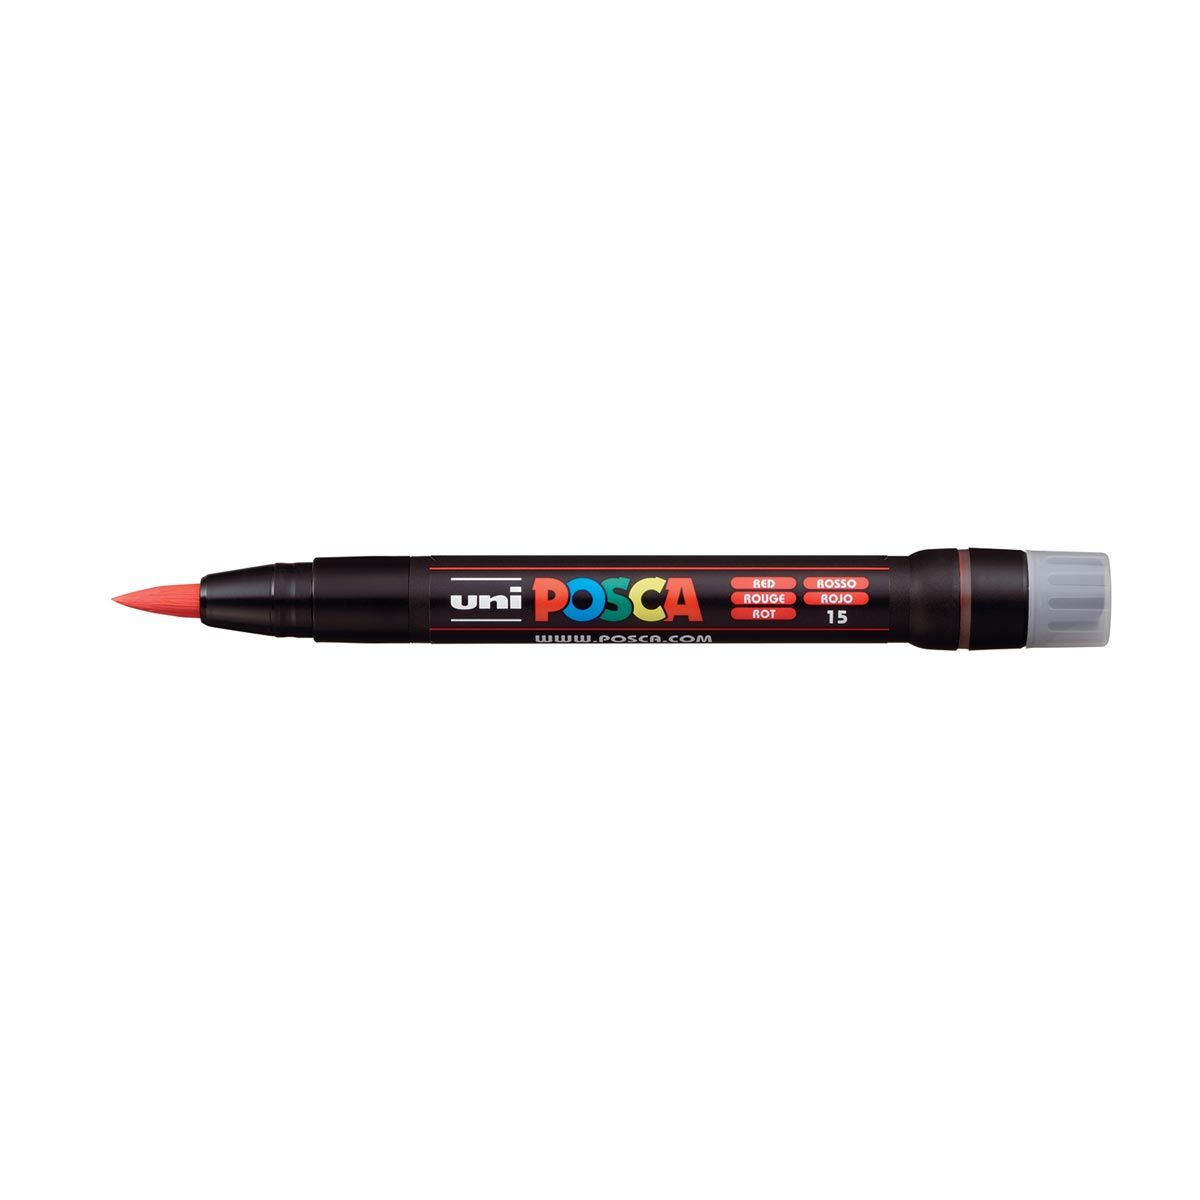 UNI POSCA PCF-350 Brush Tipped Marker Pen Red